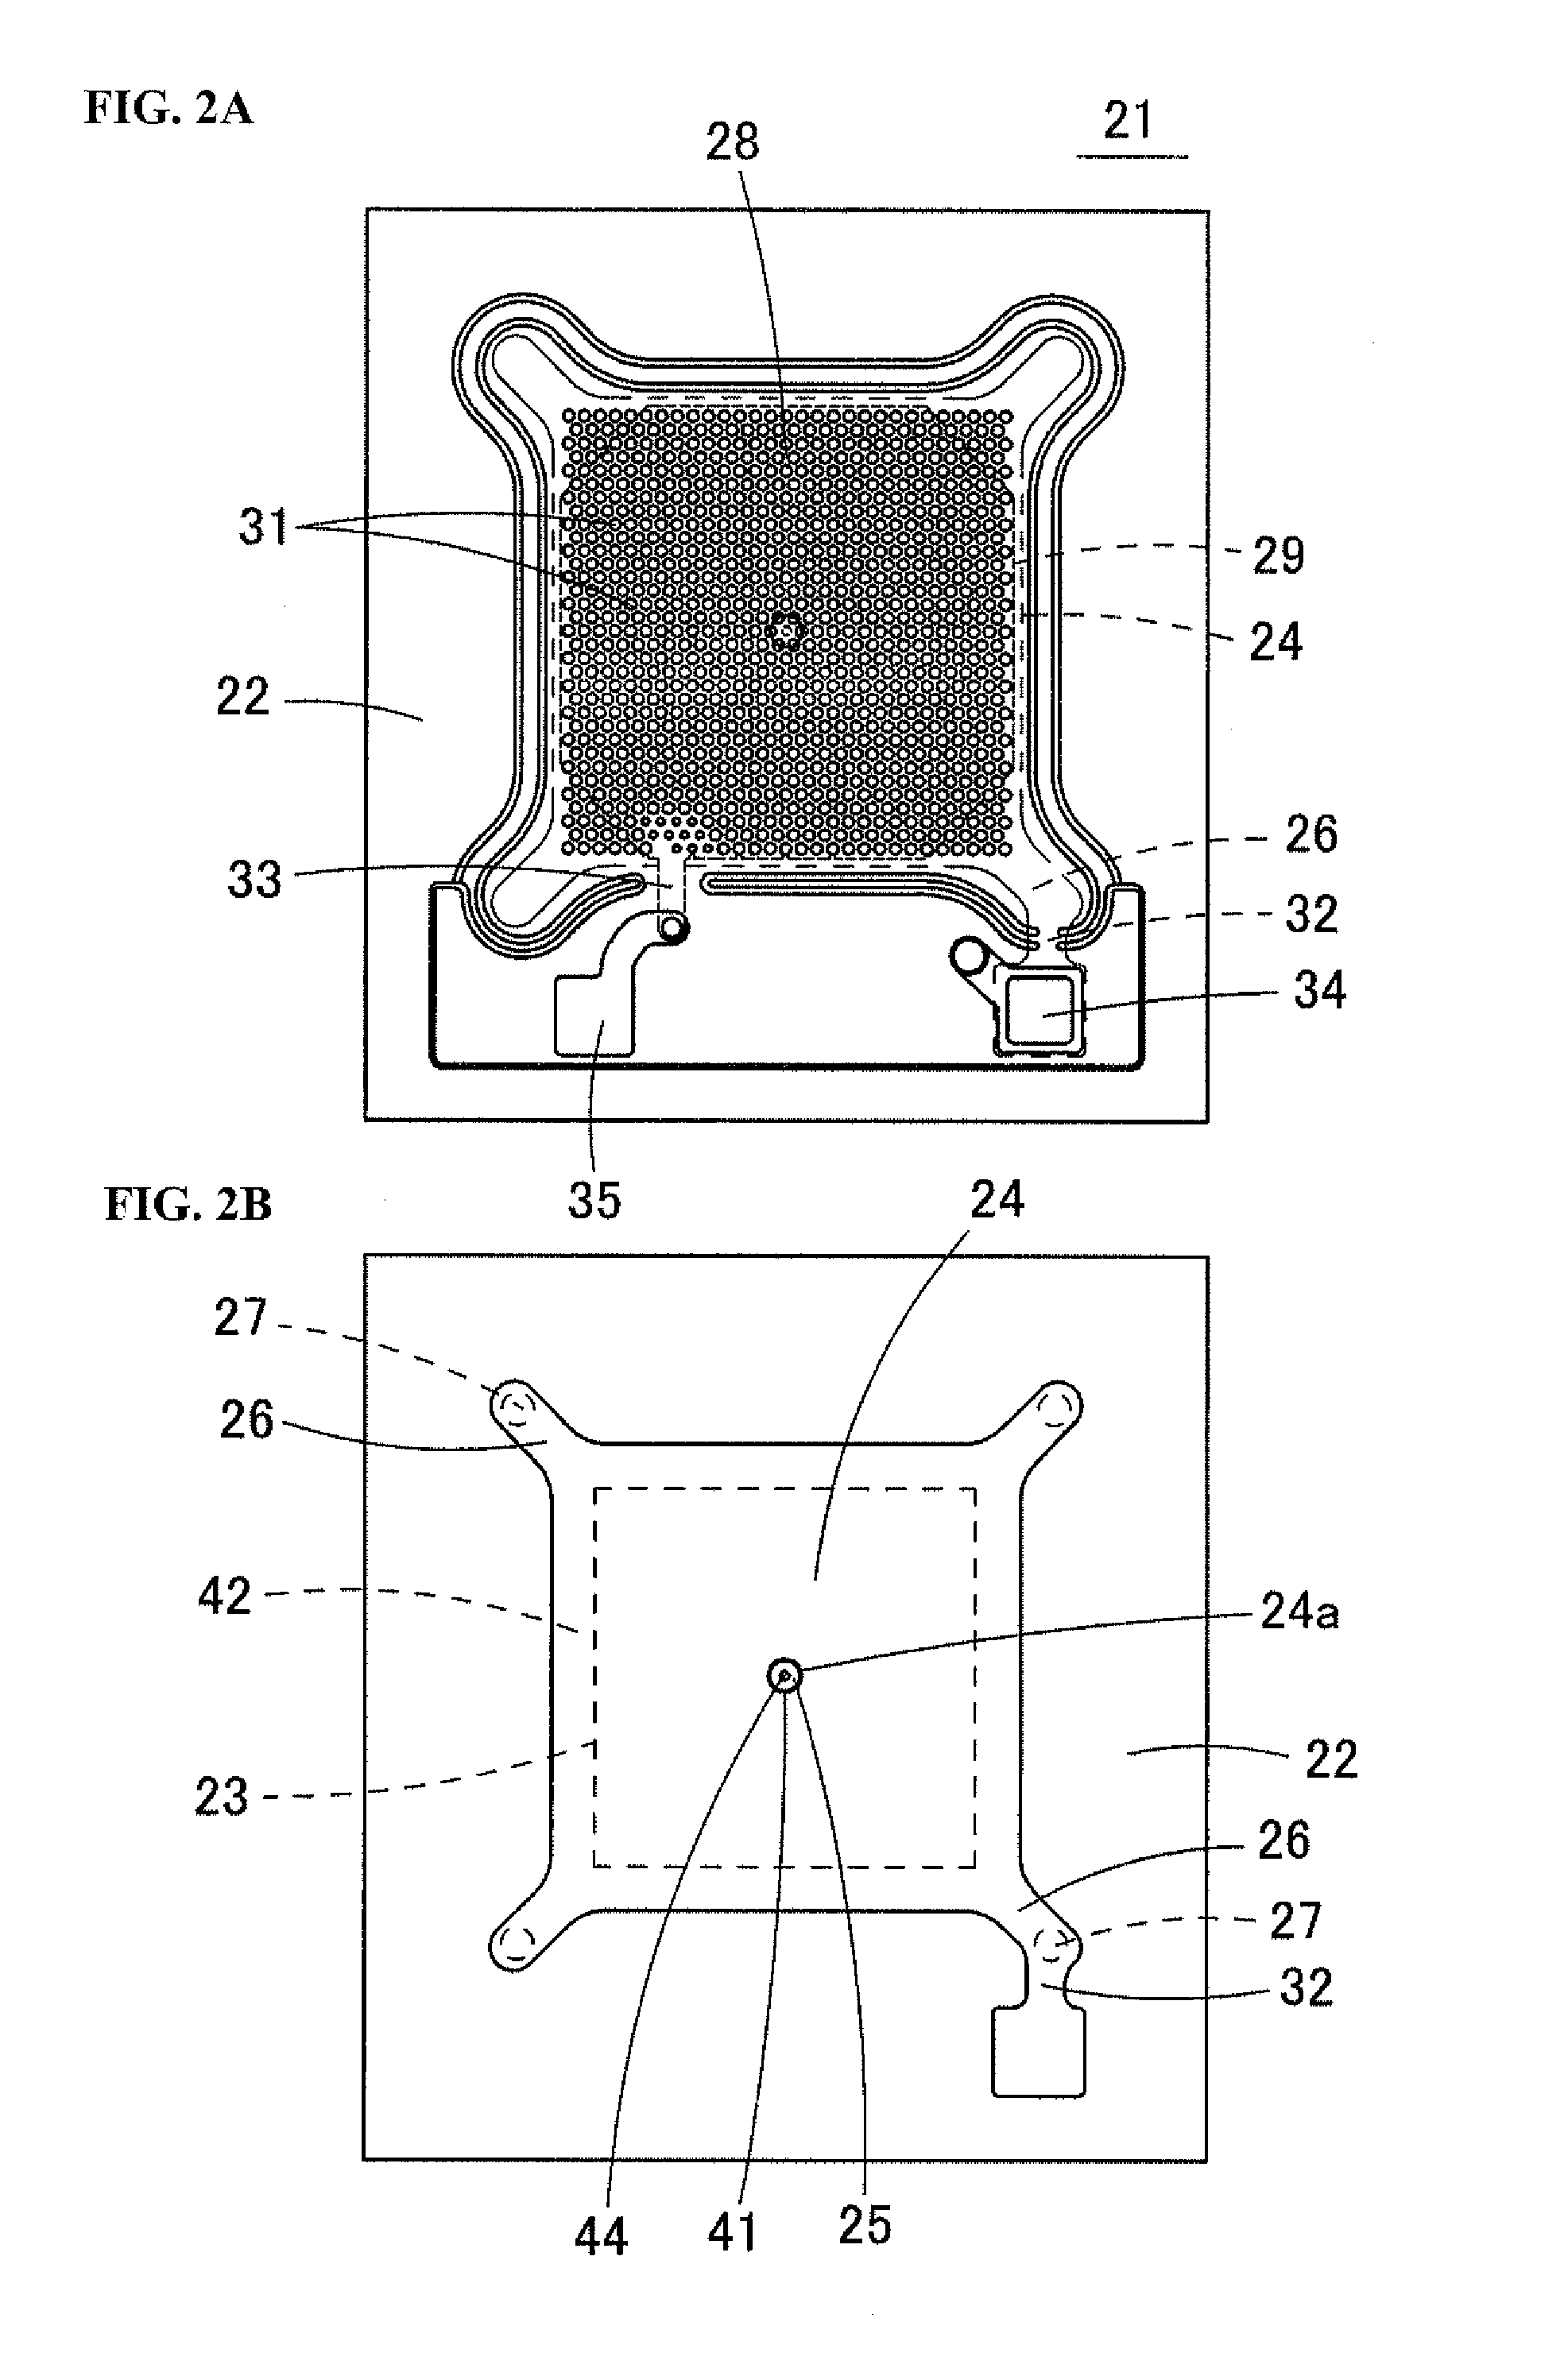 Acoustic transducer and microphone